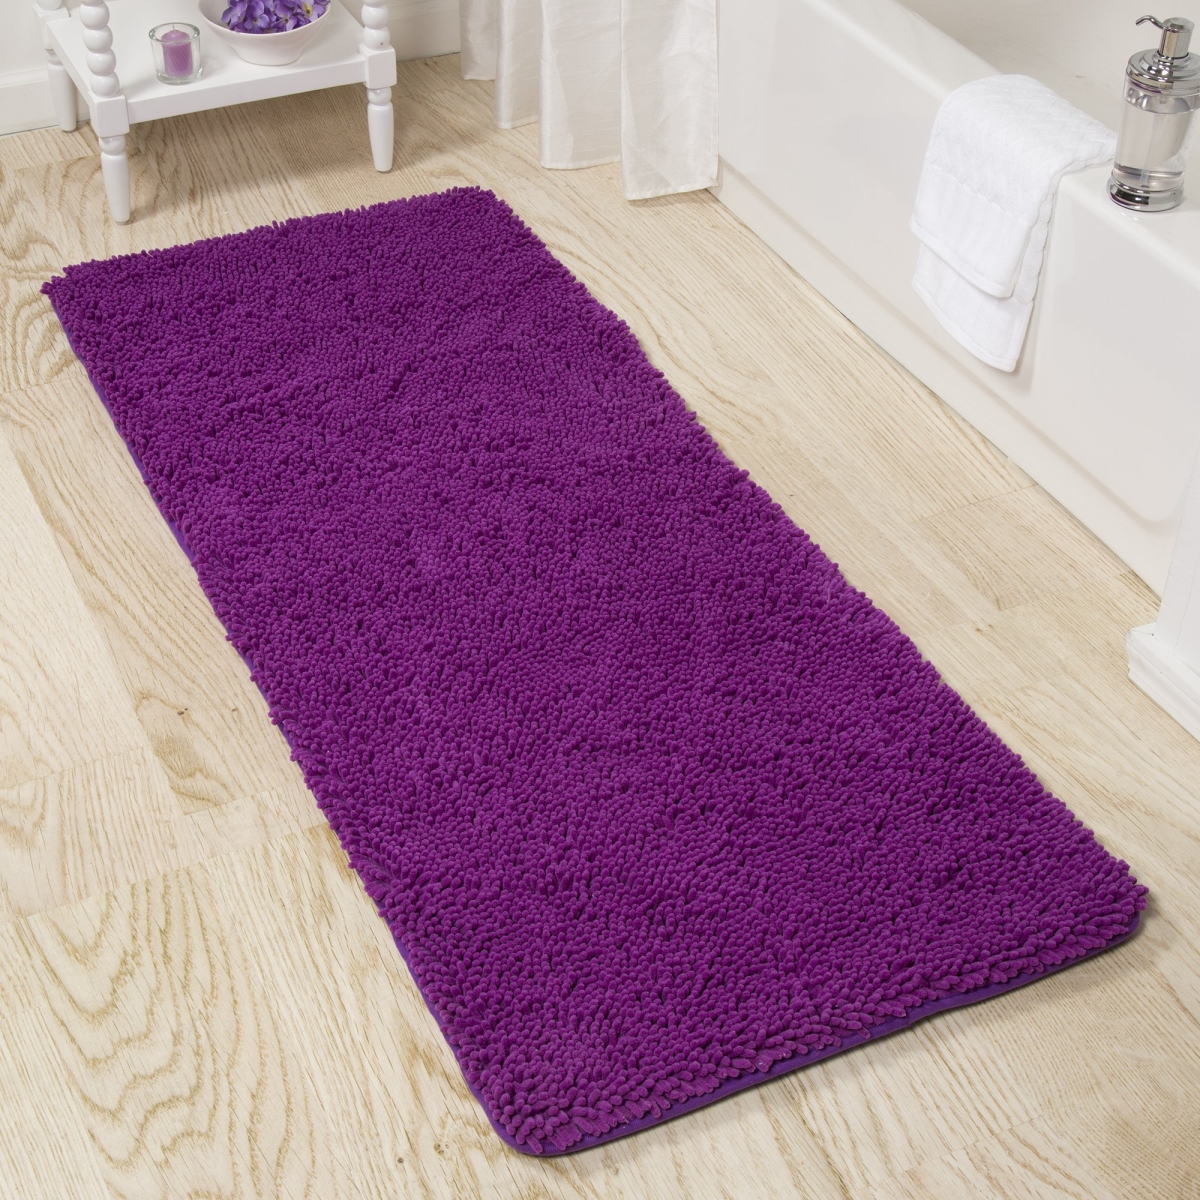 Picture of Bedford Home 67A-99124 Memory Foam Shag Bath Mat, 2 ft. by 5 ft. - Purple